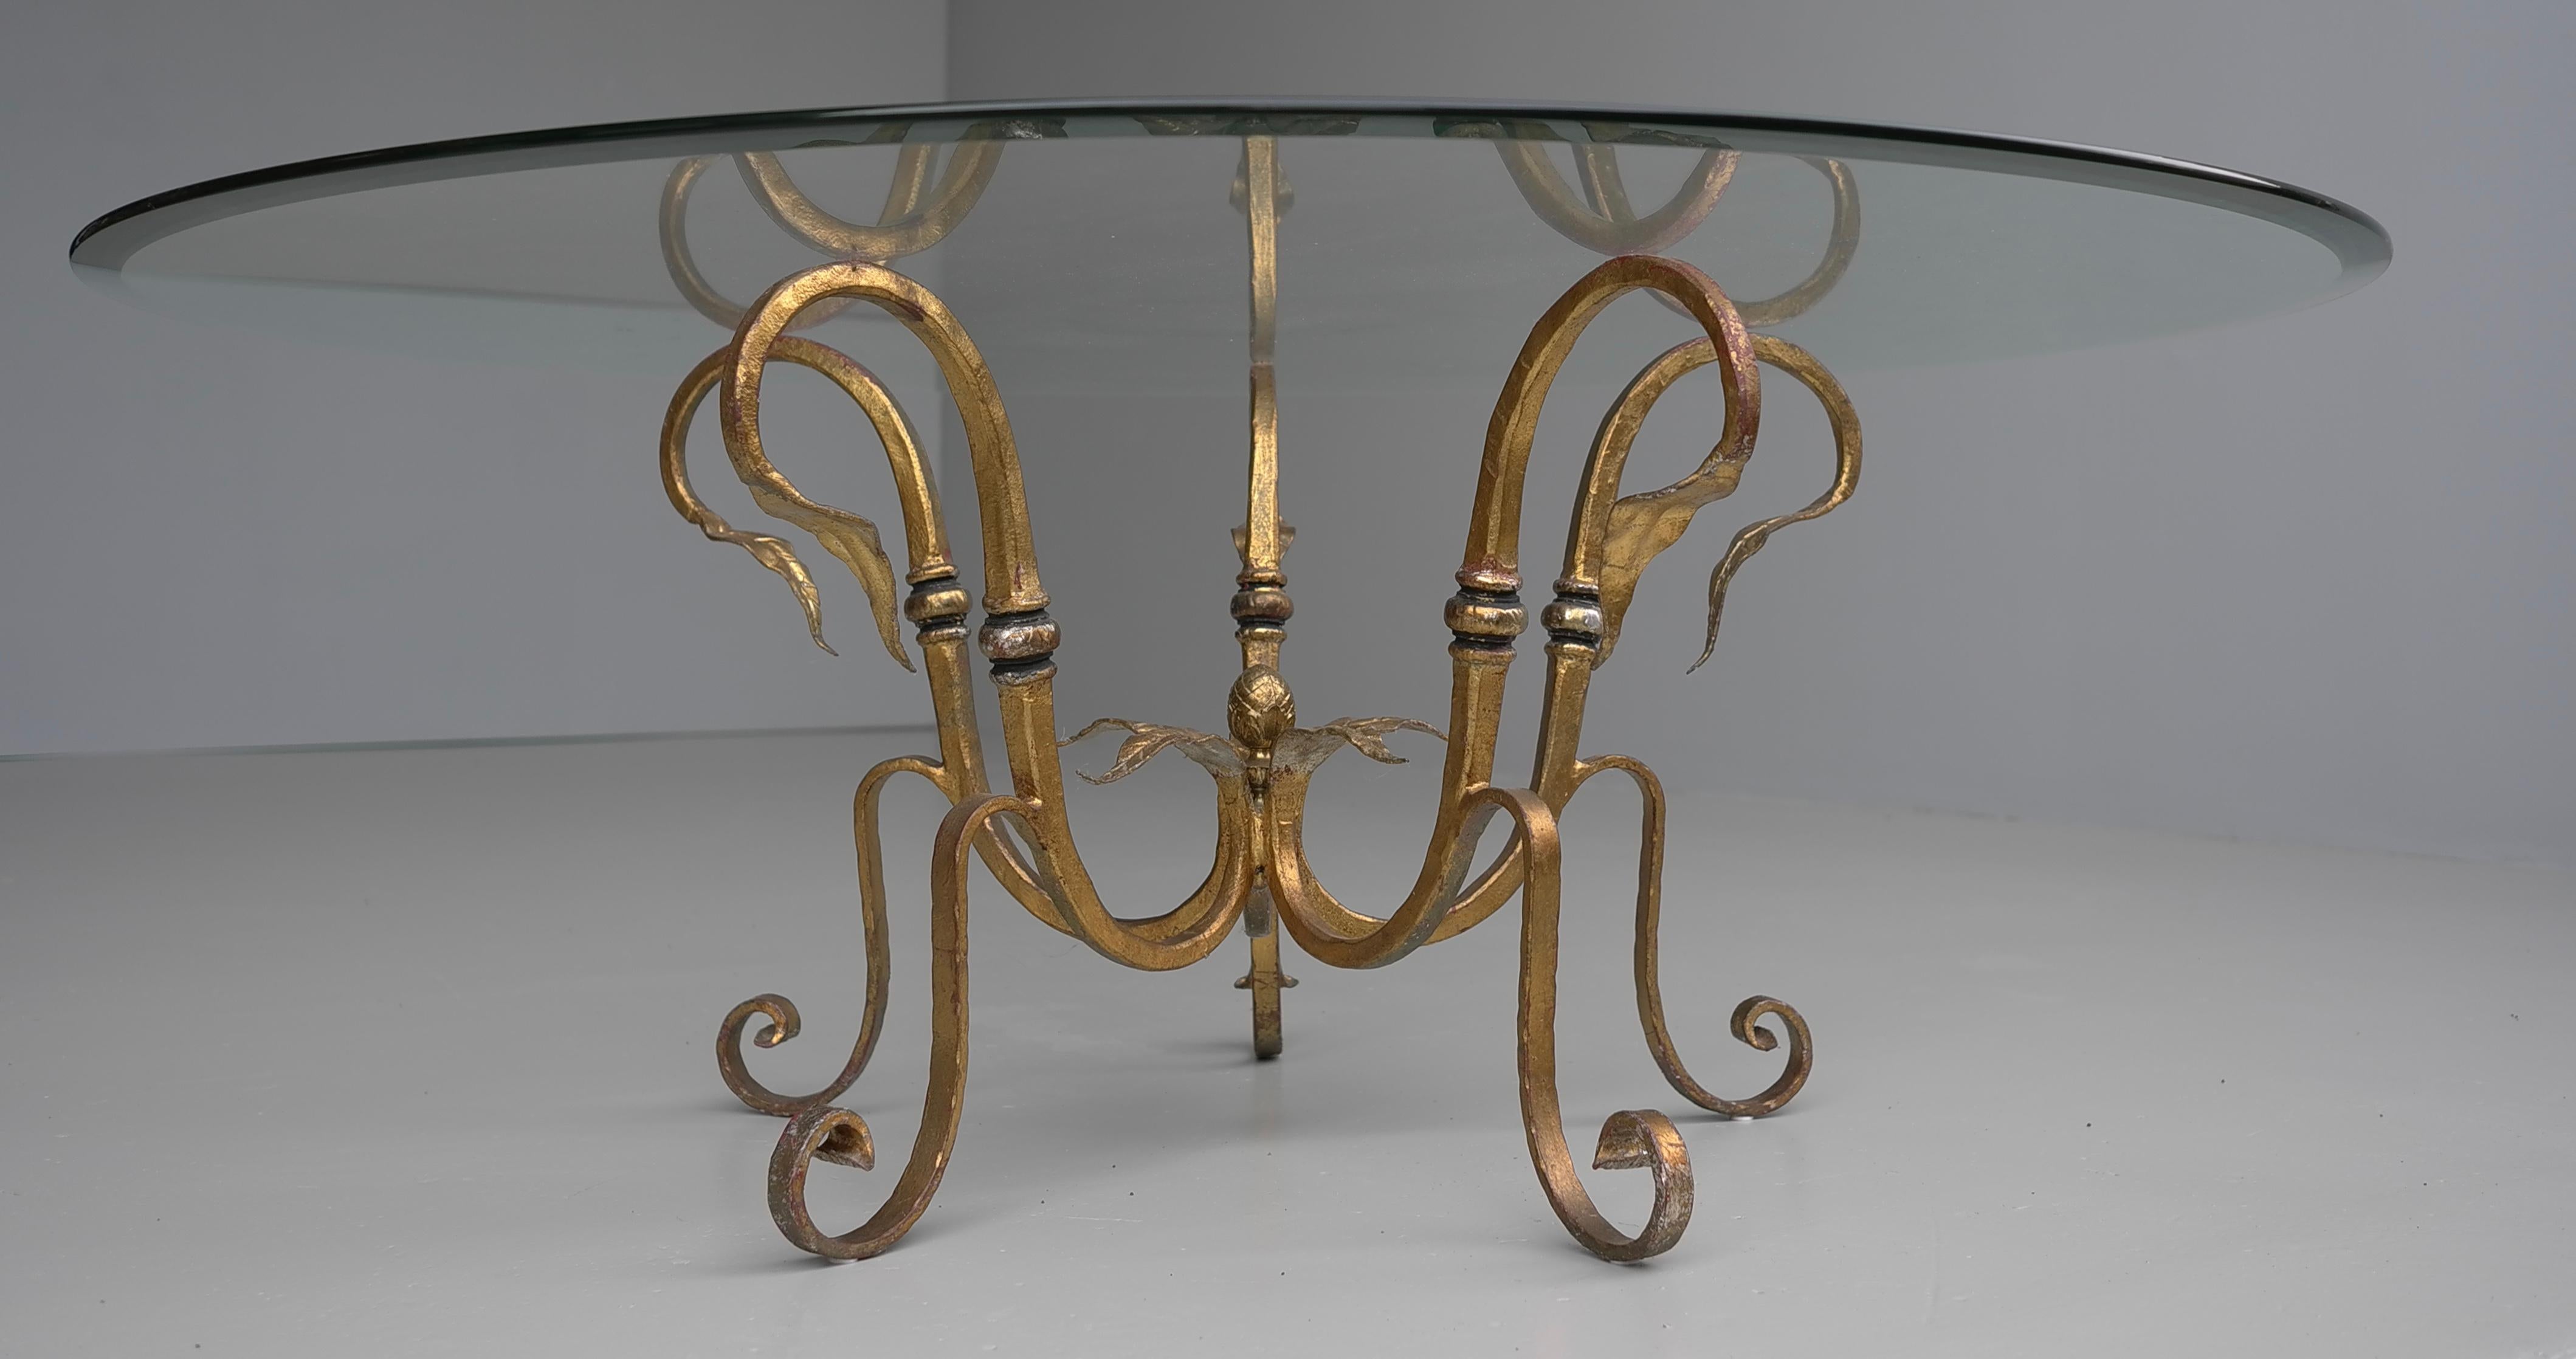 Stunning Large Gilded Iron Flower Leaf Scroll Coffee Table, France circa 1960's. This piece has has a wonderful distressed gold finish and is very heavy. The glass is very thick and looks fabulous with the sculptural iron base.